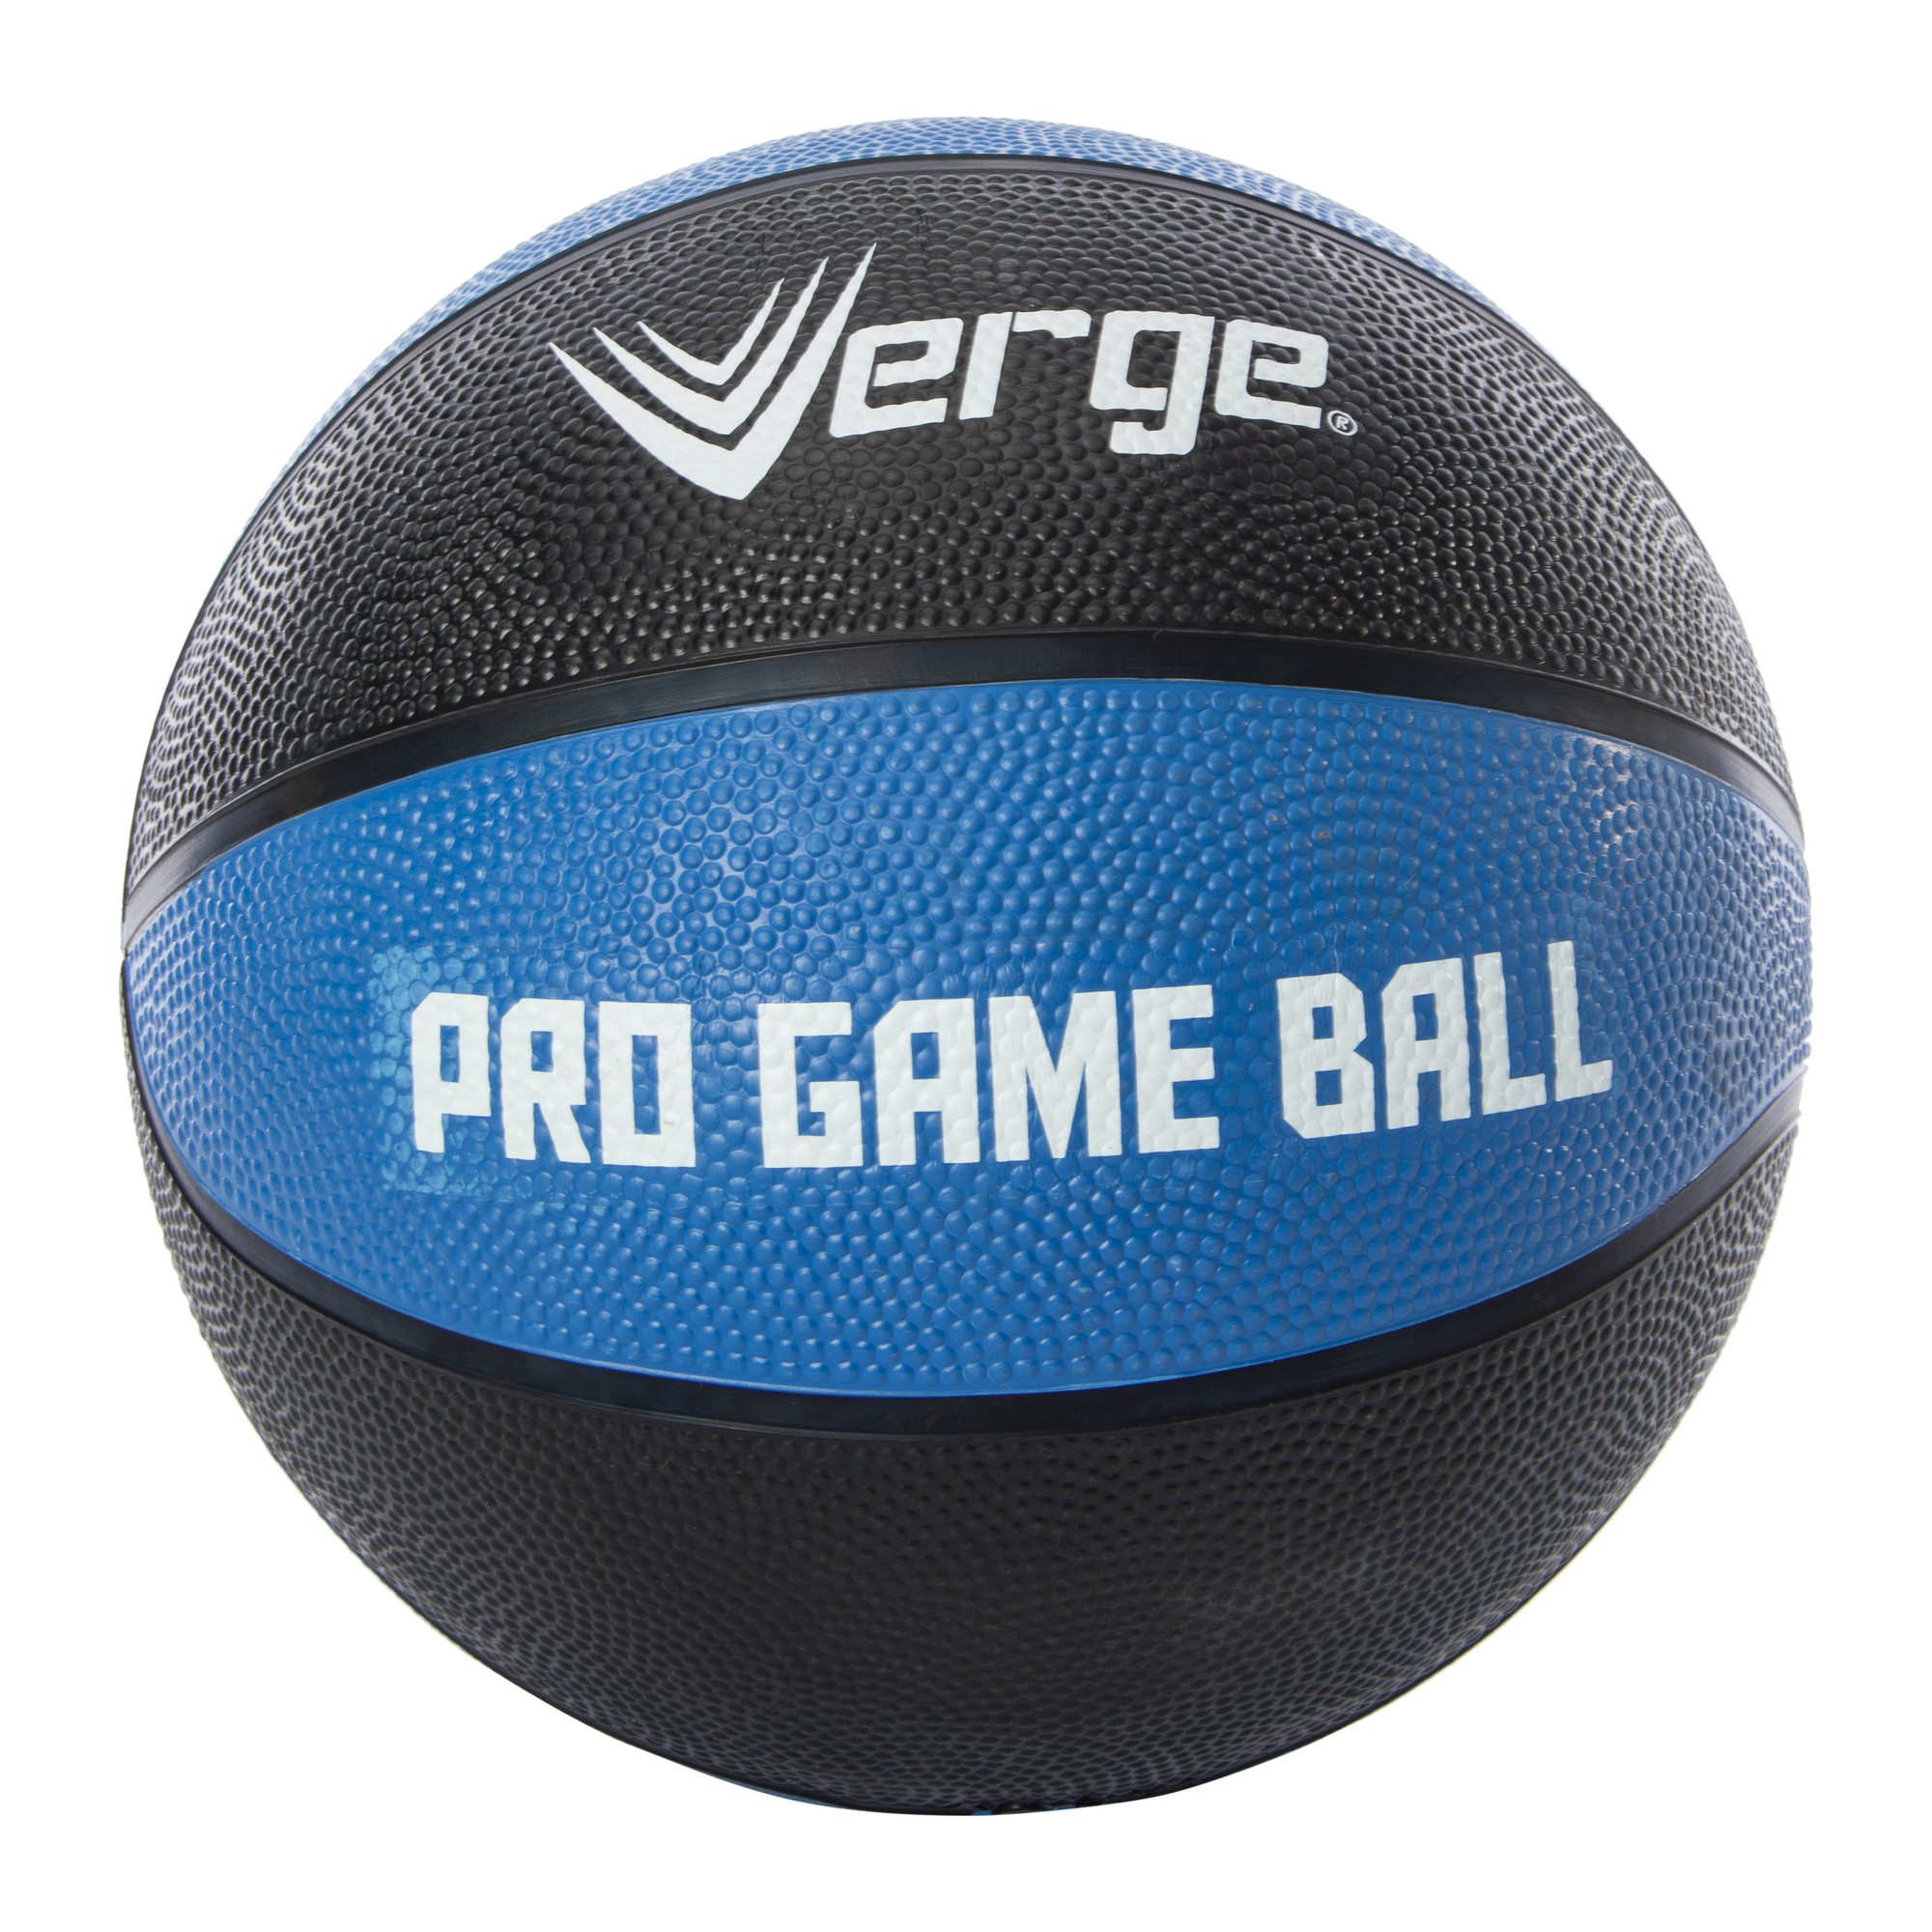 verge® women's official size basketball 28.5in